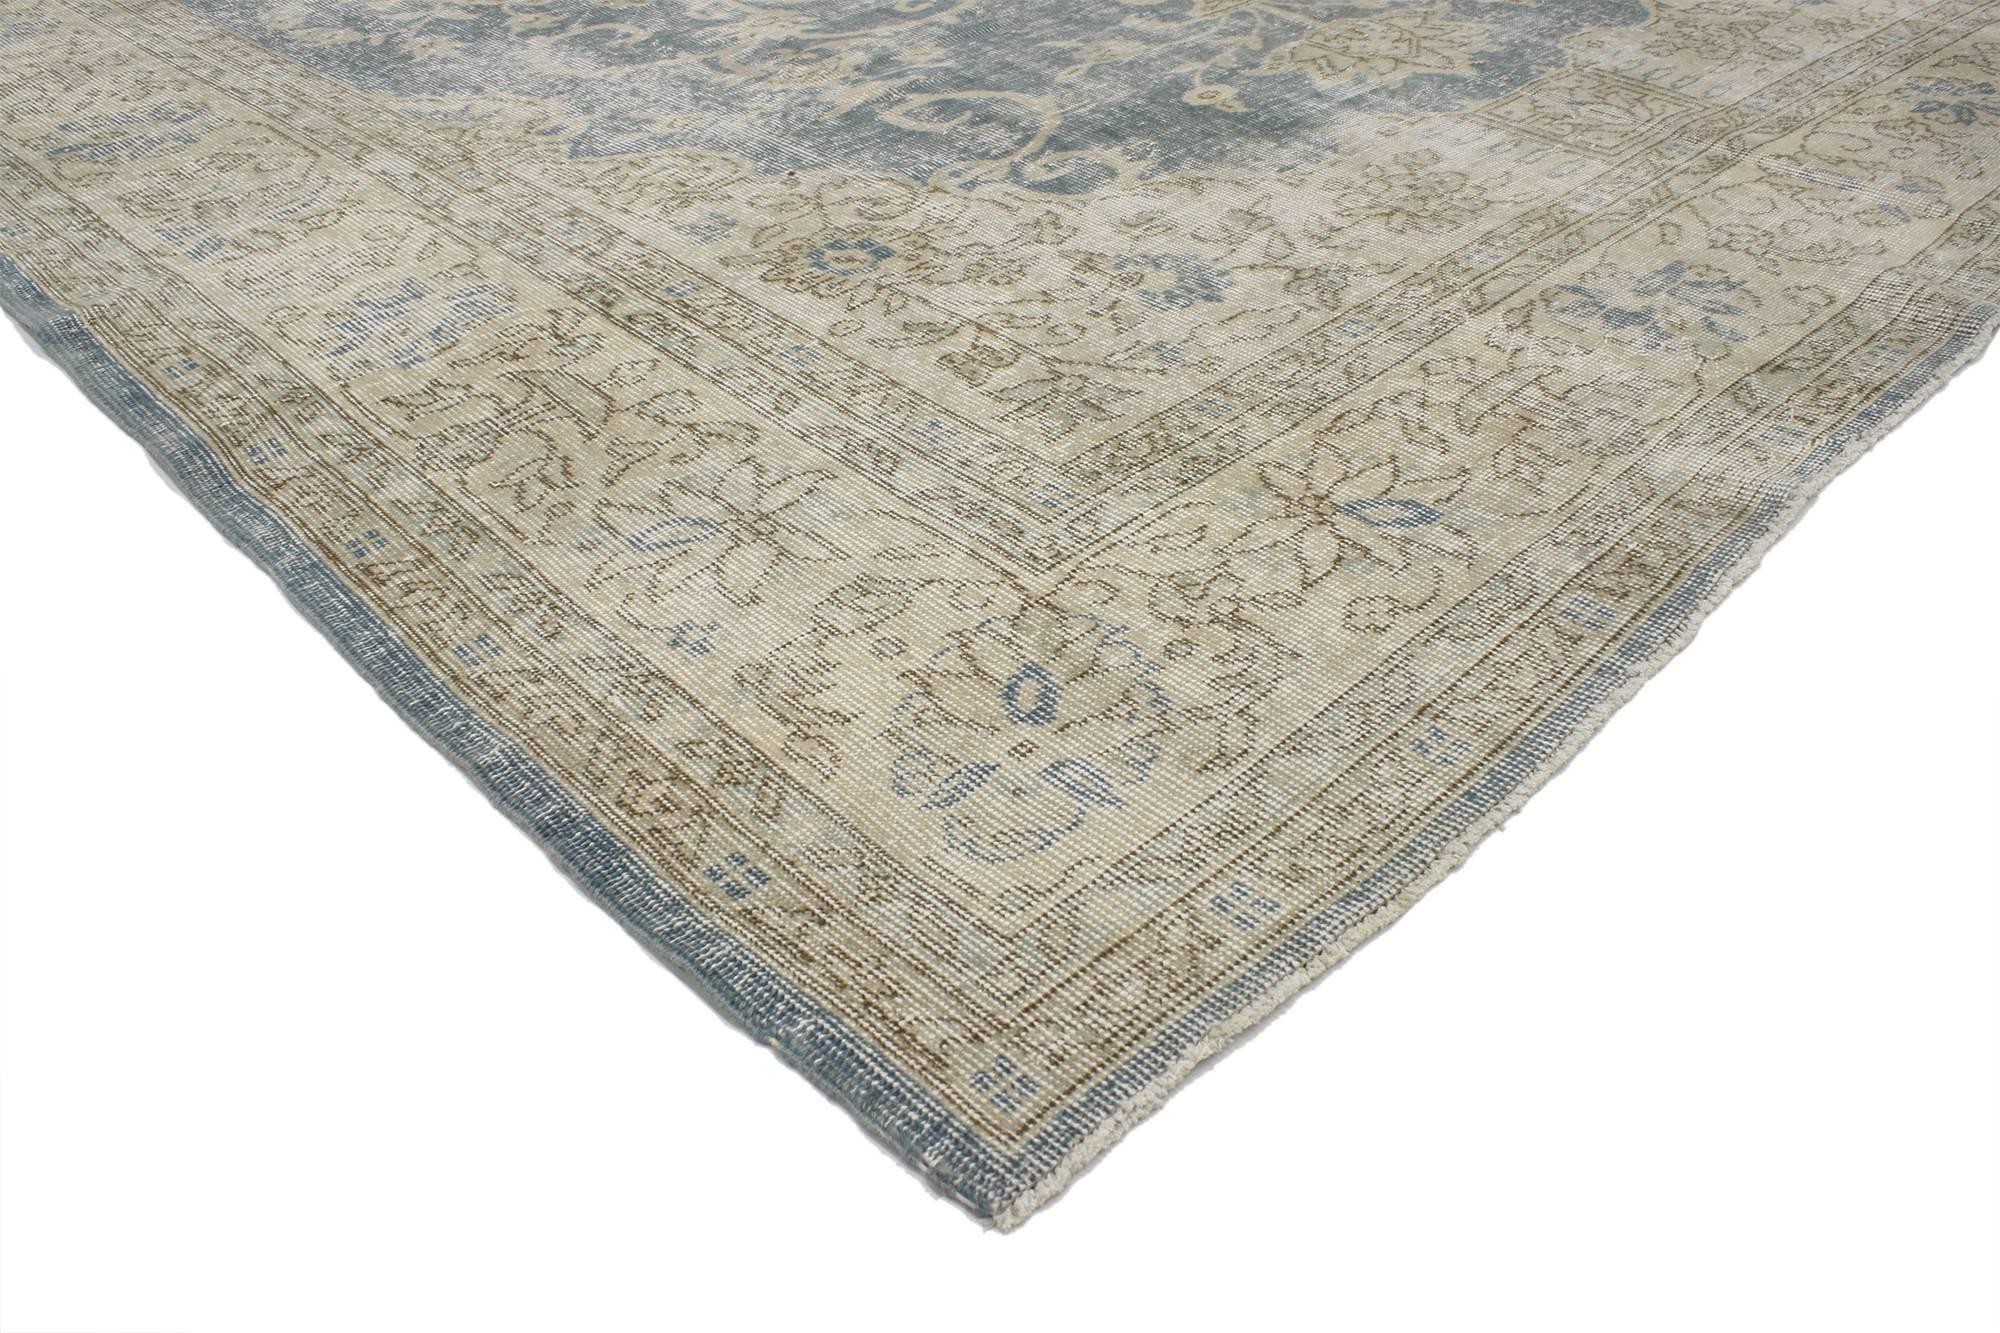 Industrial Distressed Vintage Turkish Sivas Rug with Shabby Chic Farmhouse Style